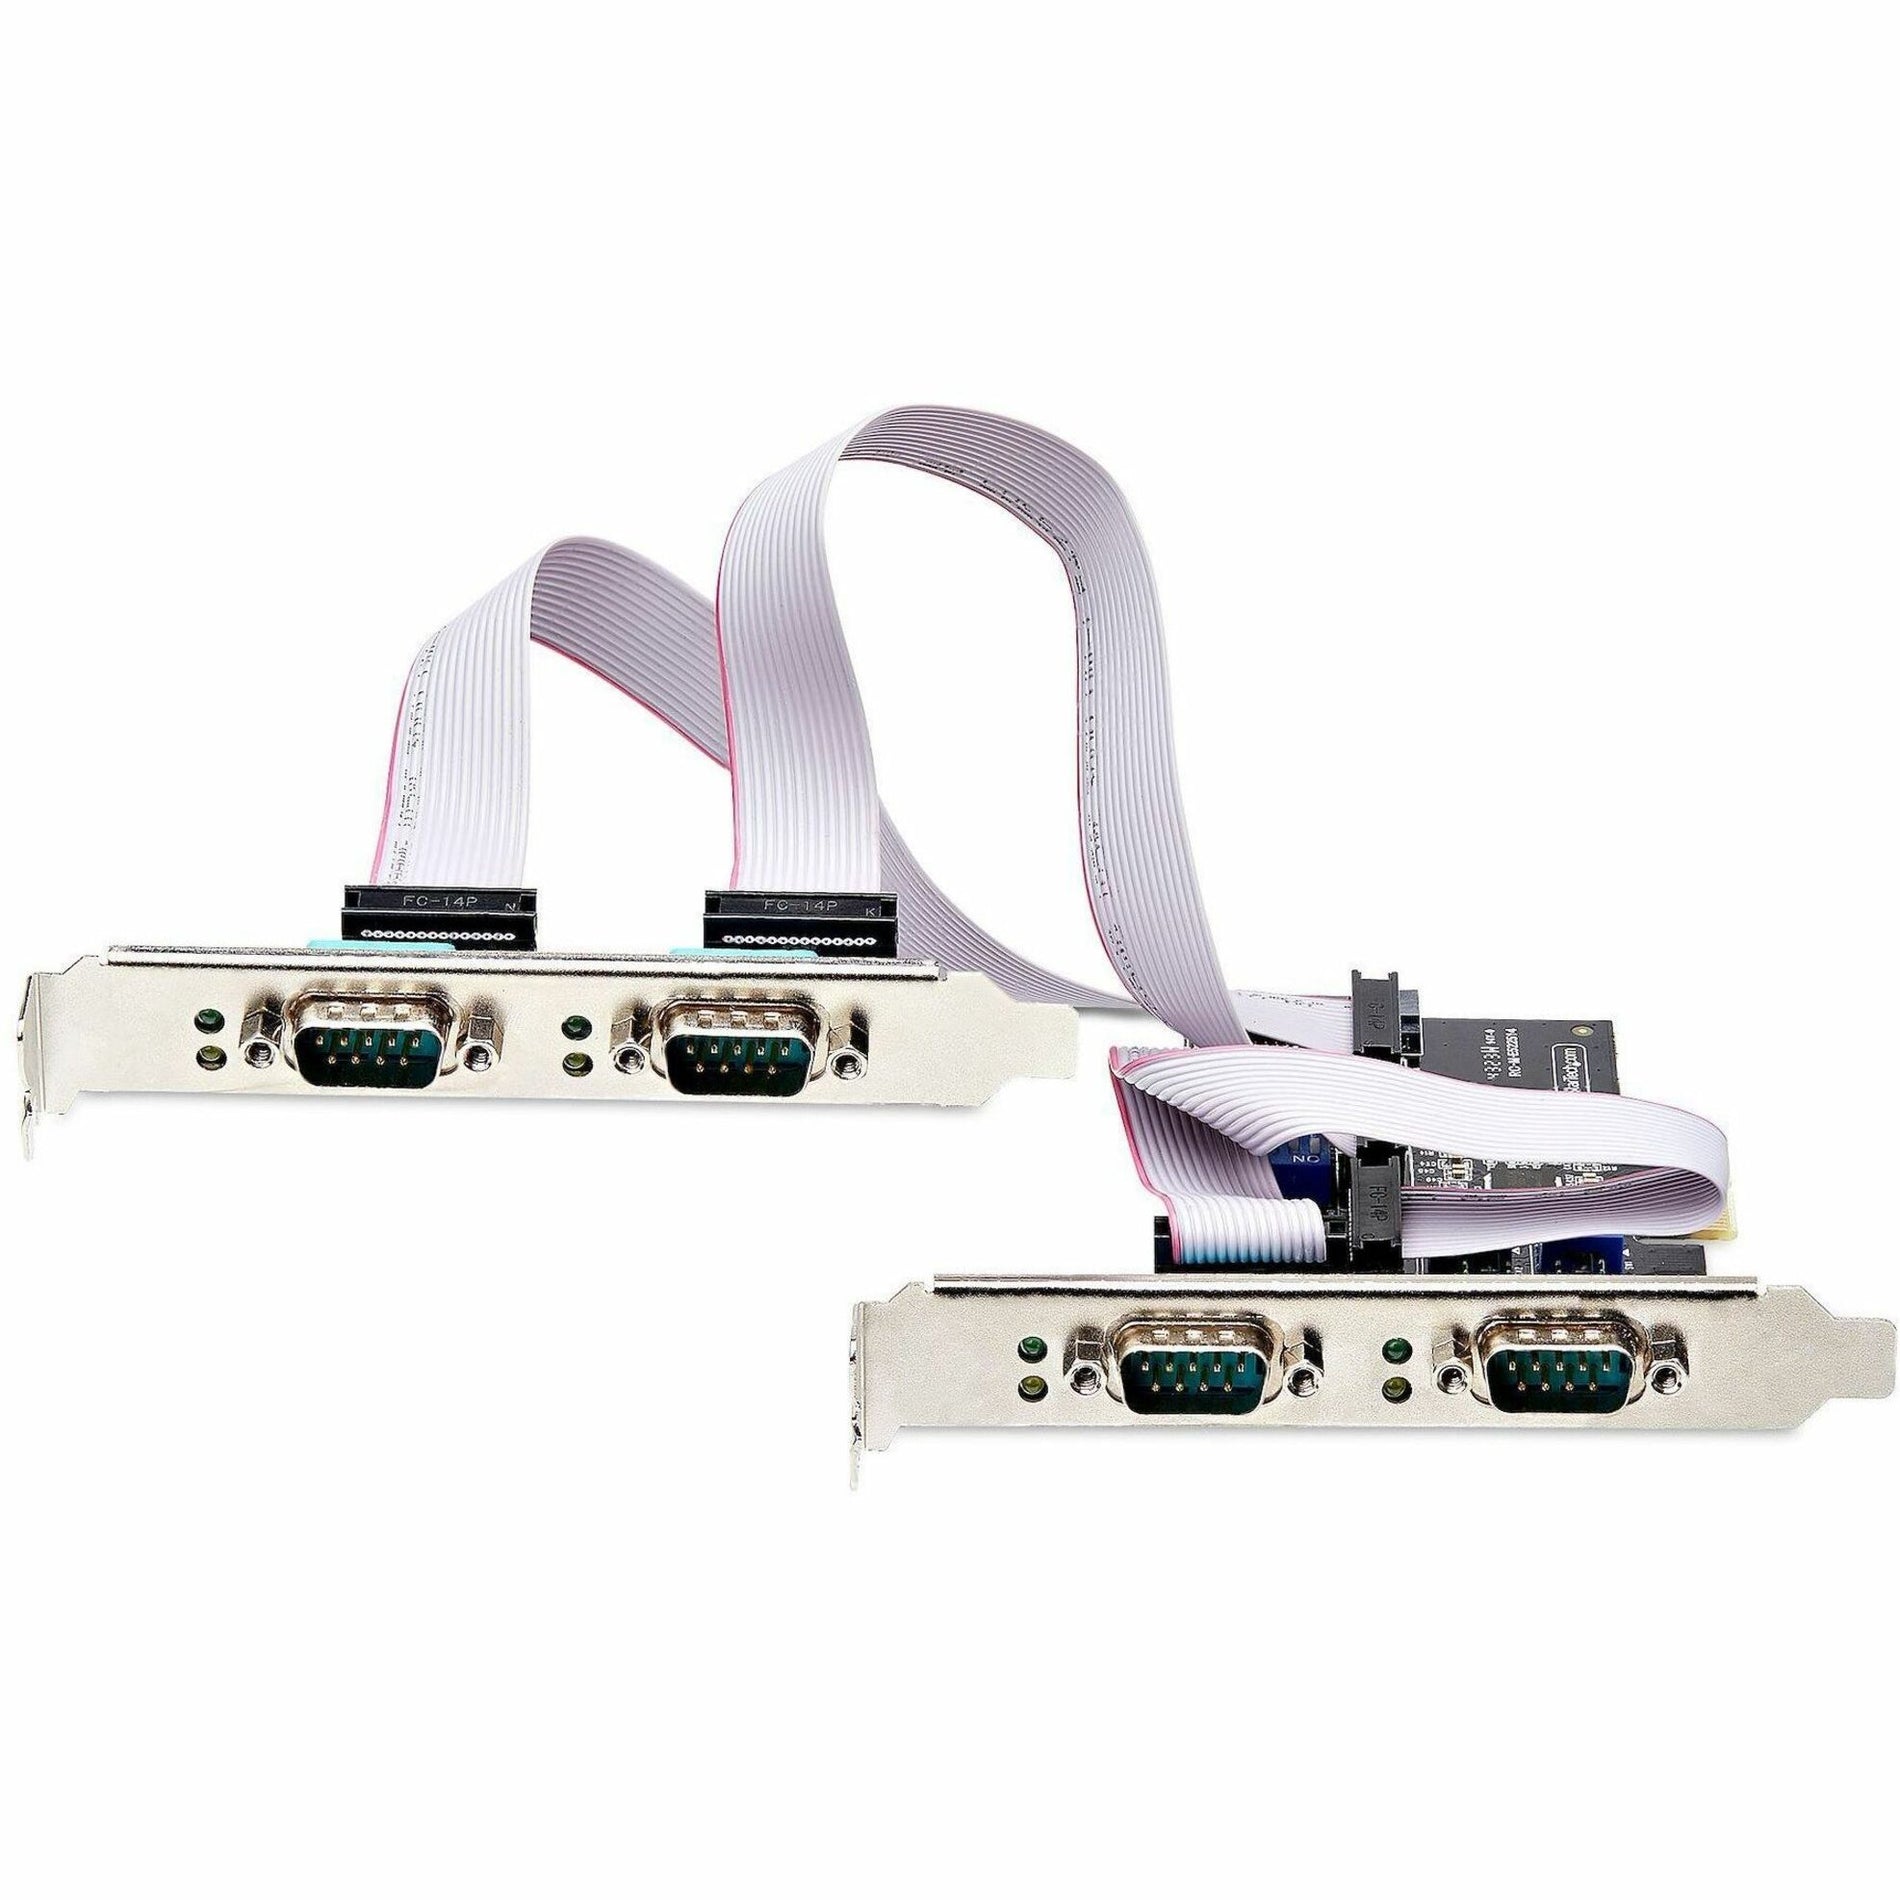 StarTech.com (PS74ADFSERIALCARD) Serial/Parallel Adapters (PS74ADF-SERIAL-CARD)